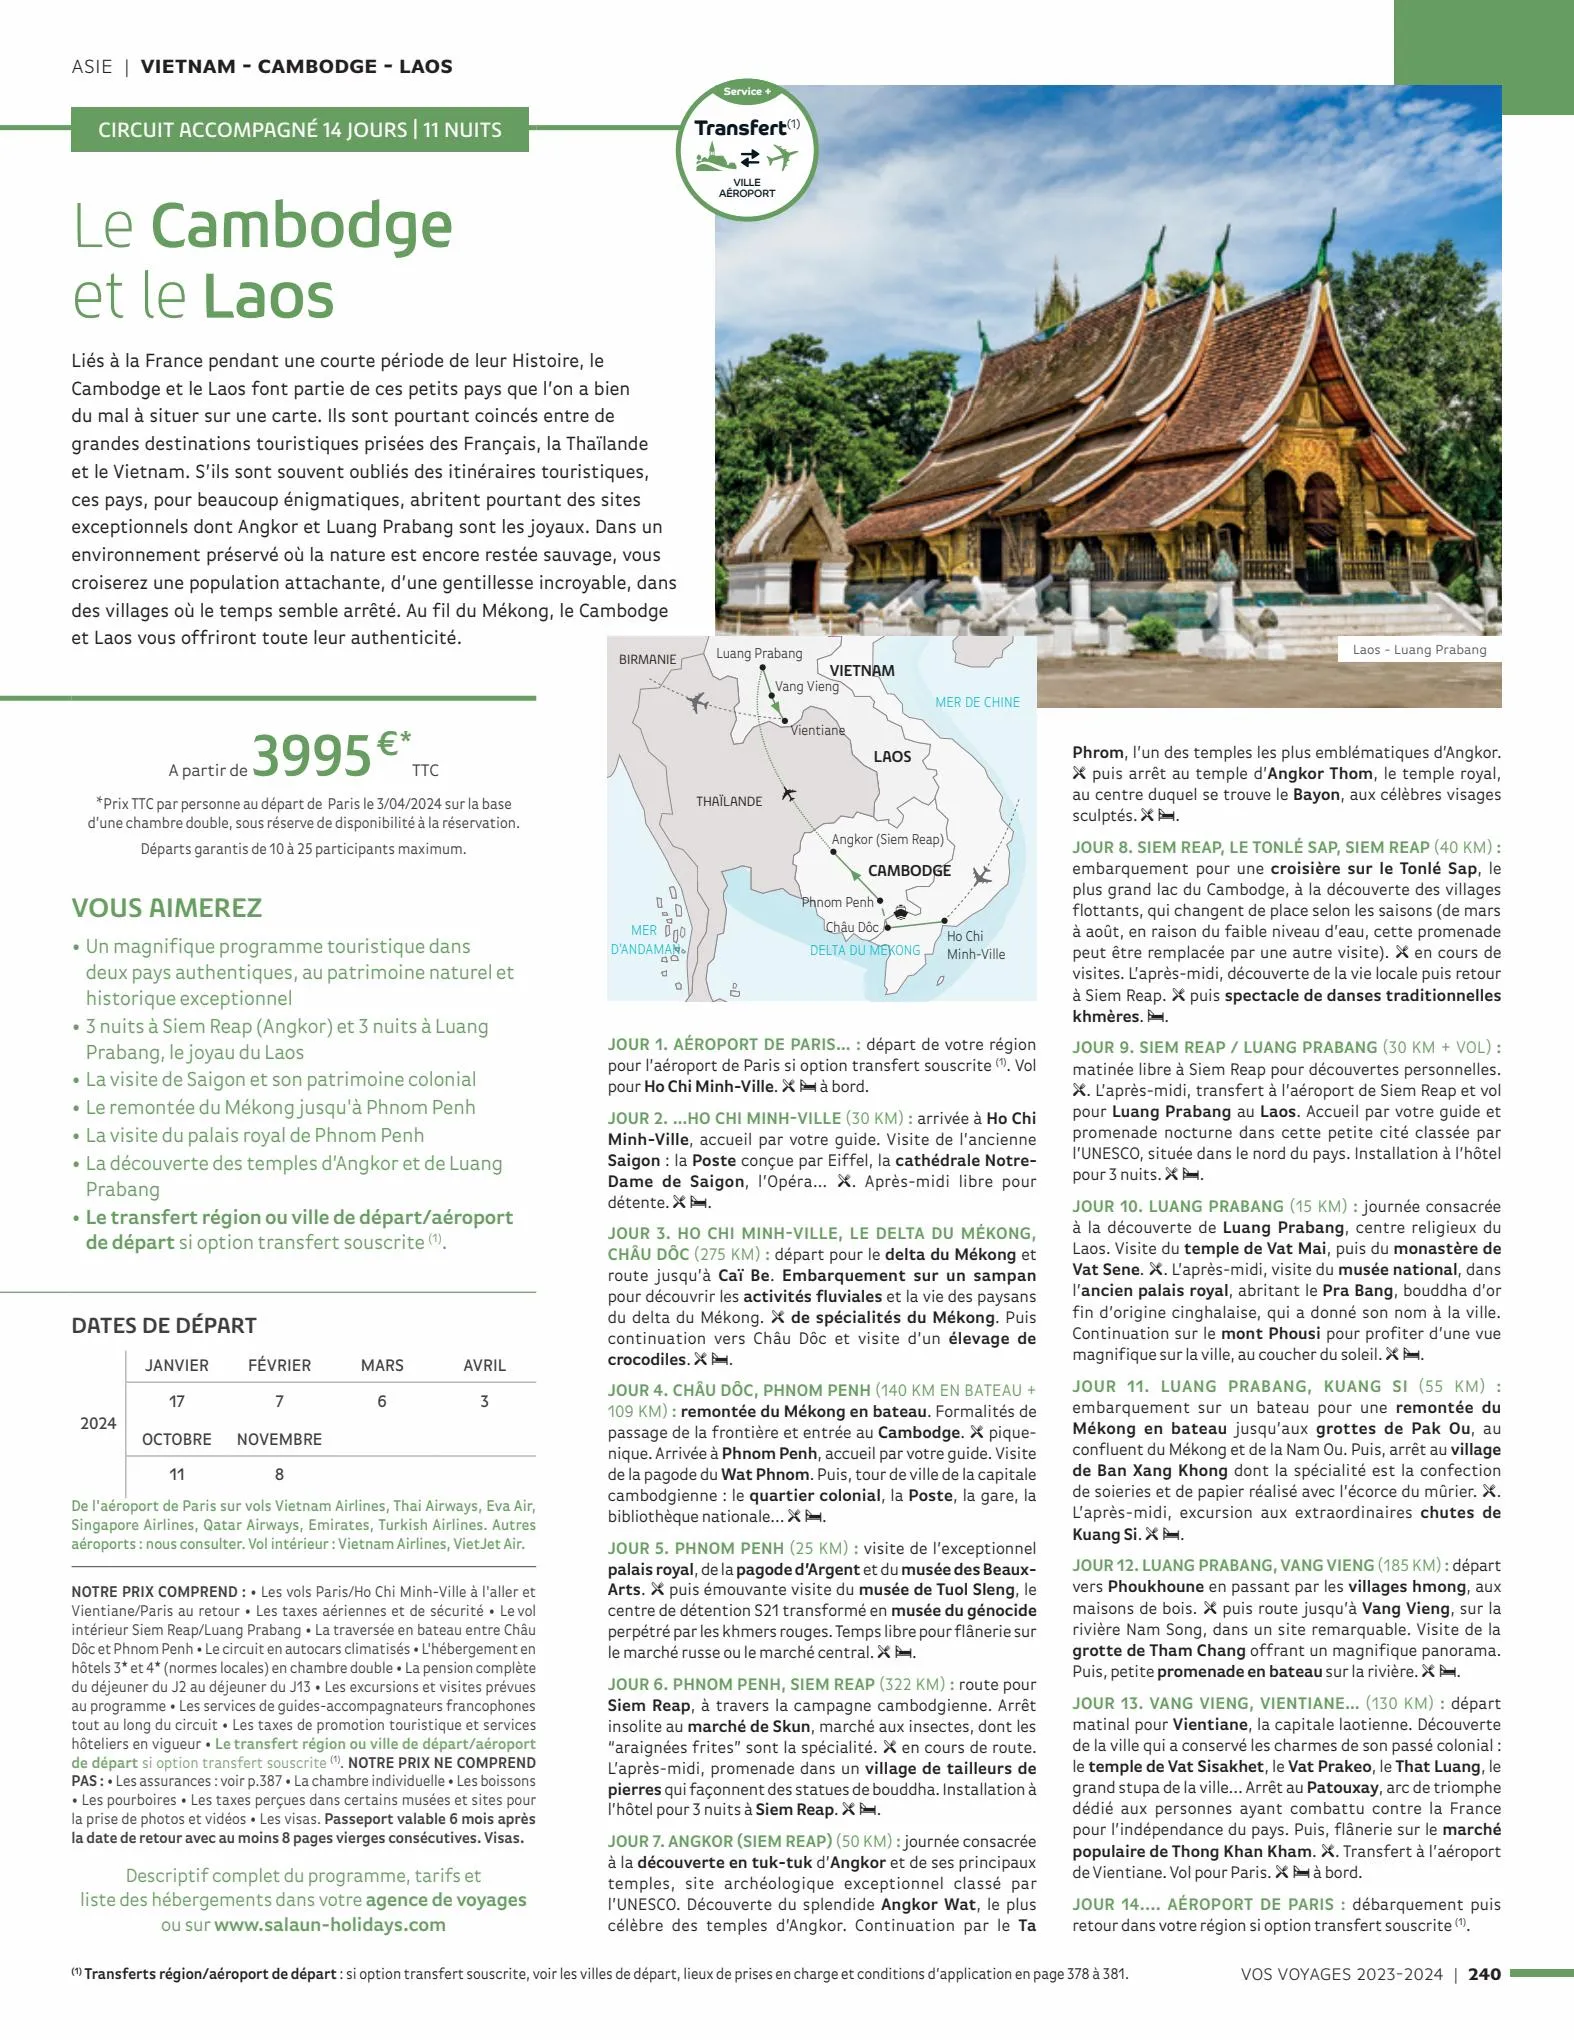 Catalogue Vos voyages 2023-2024, page 00240